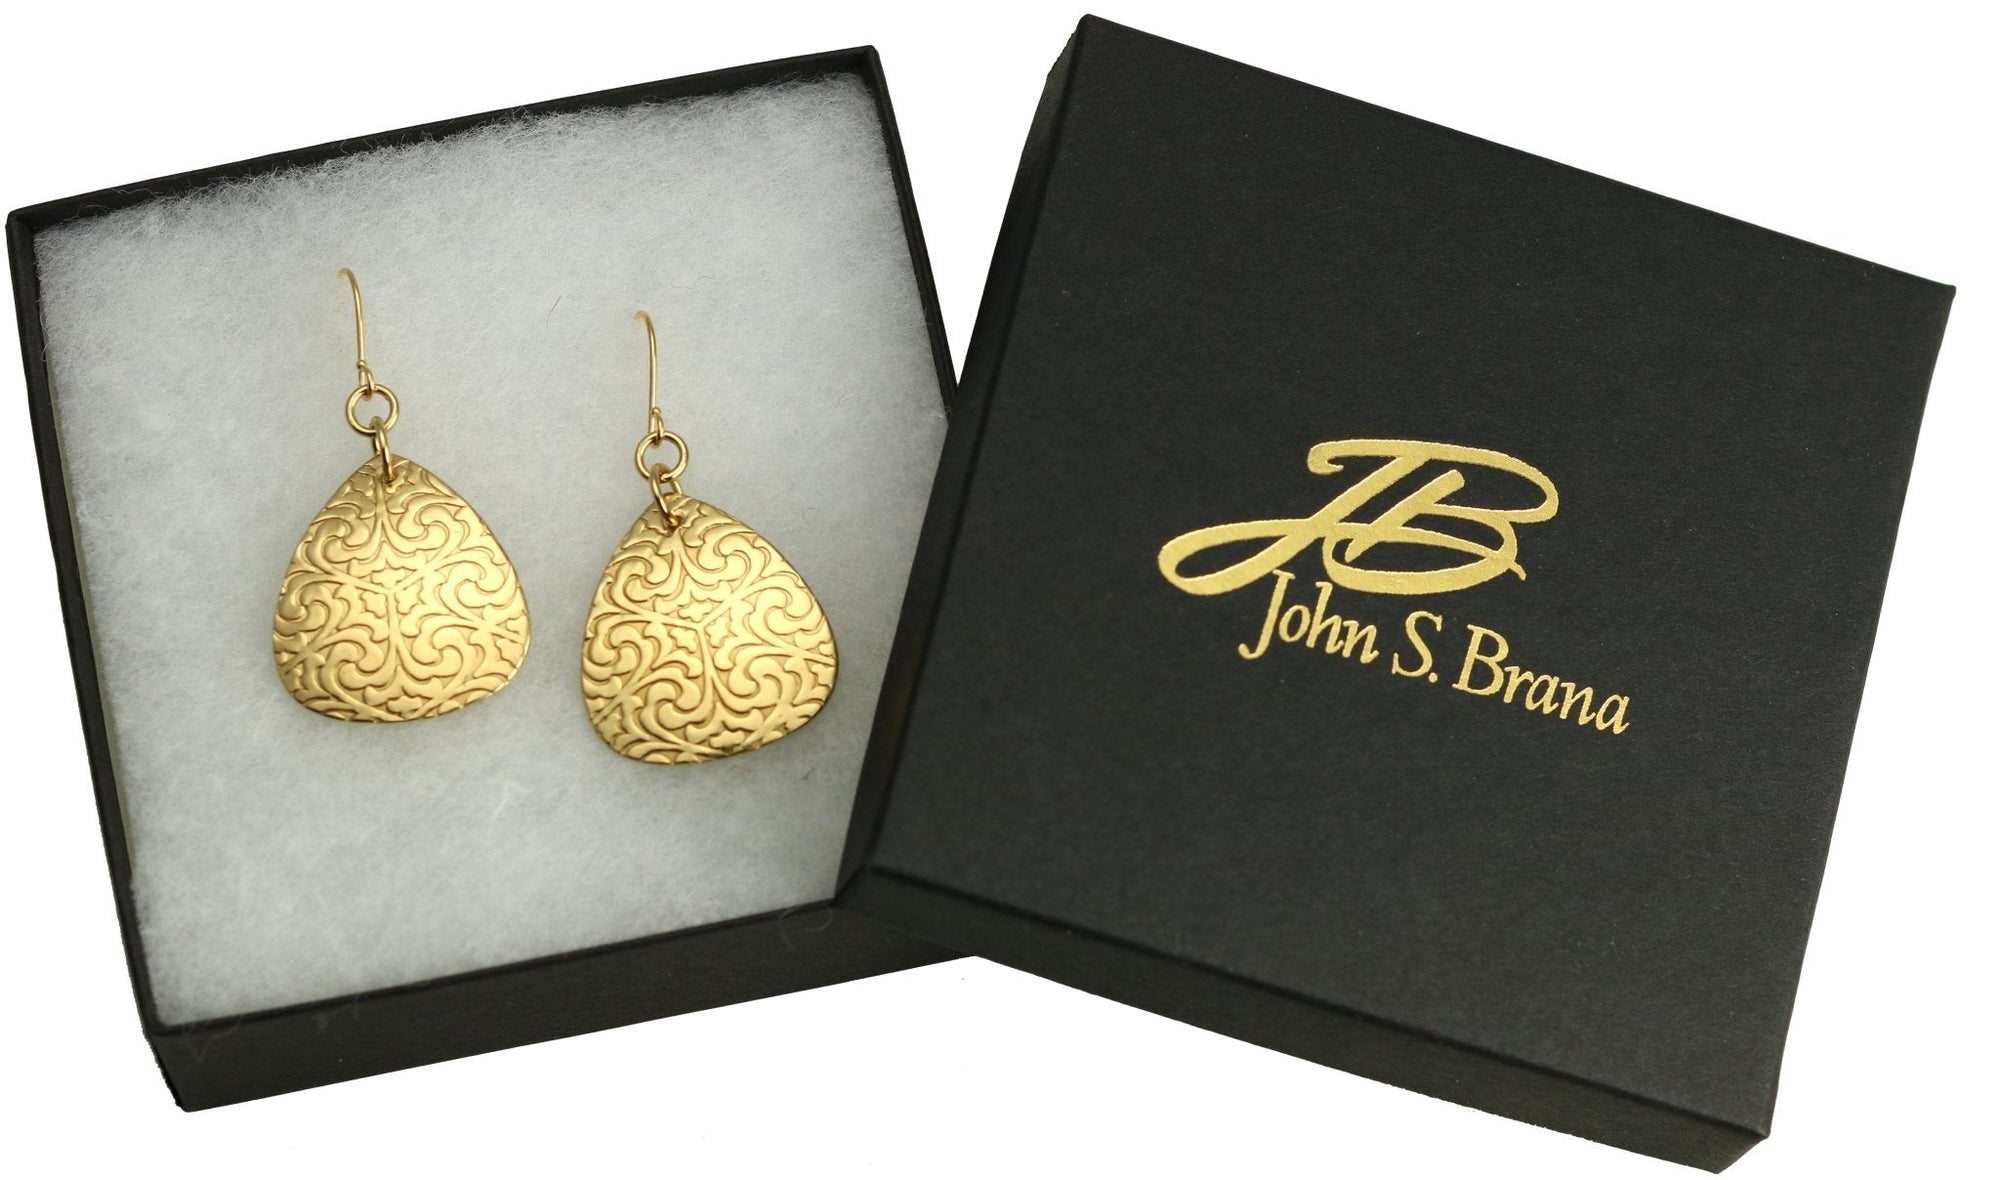 Damask Embossed Nu Gold Triangular Drop Earrings in Gift Box